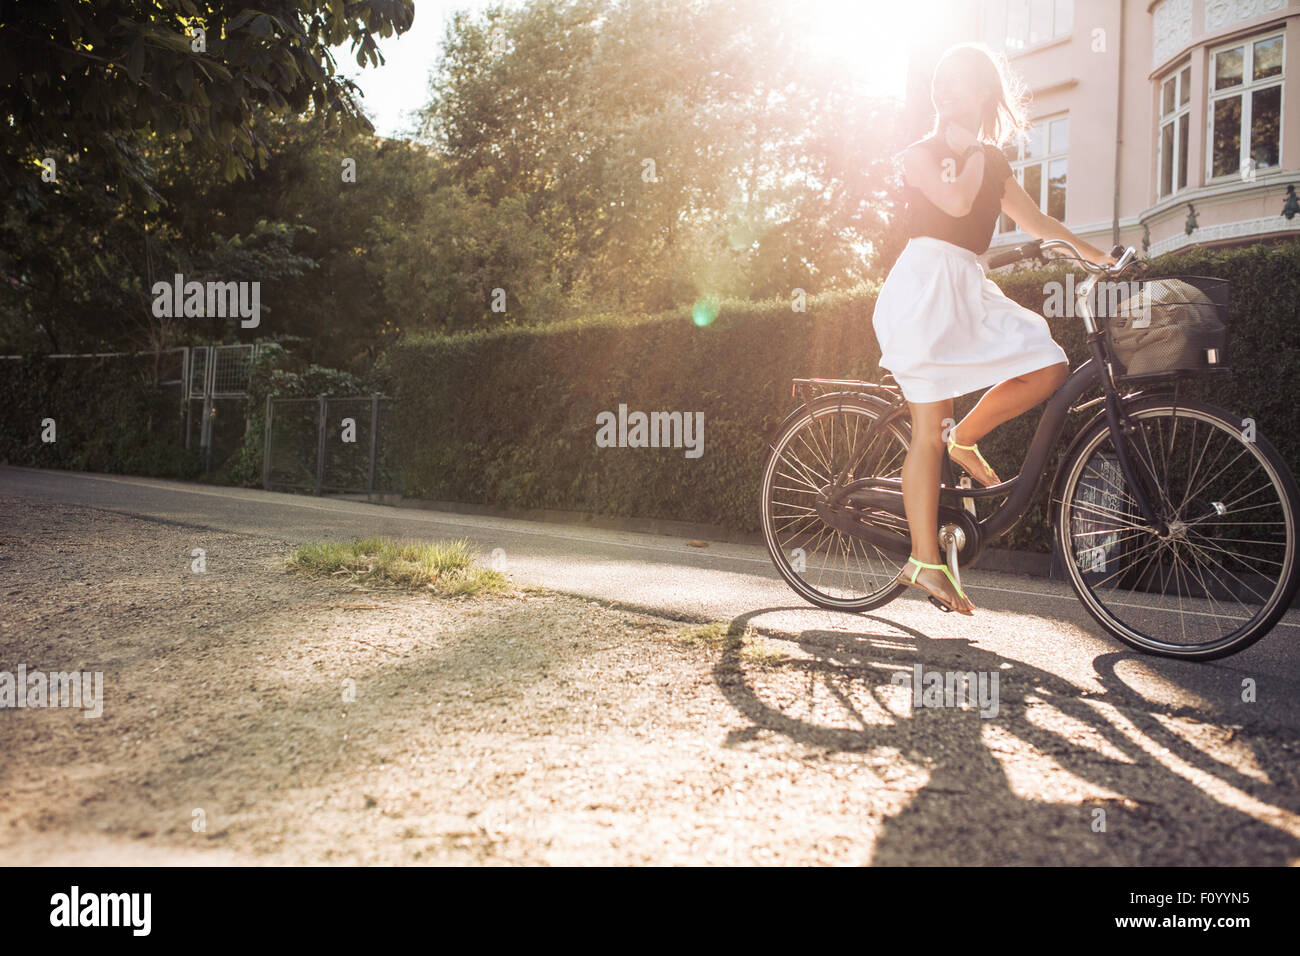 Outdoor shot of a young woman cycling on street. Female riding bicycle with sun flare. Stock Photo